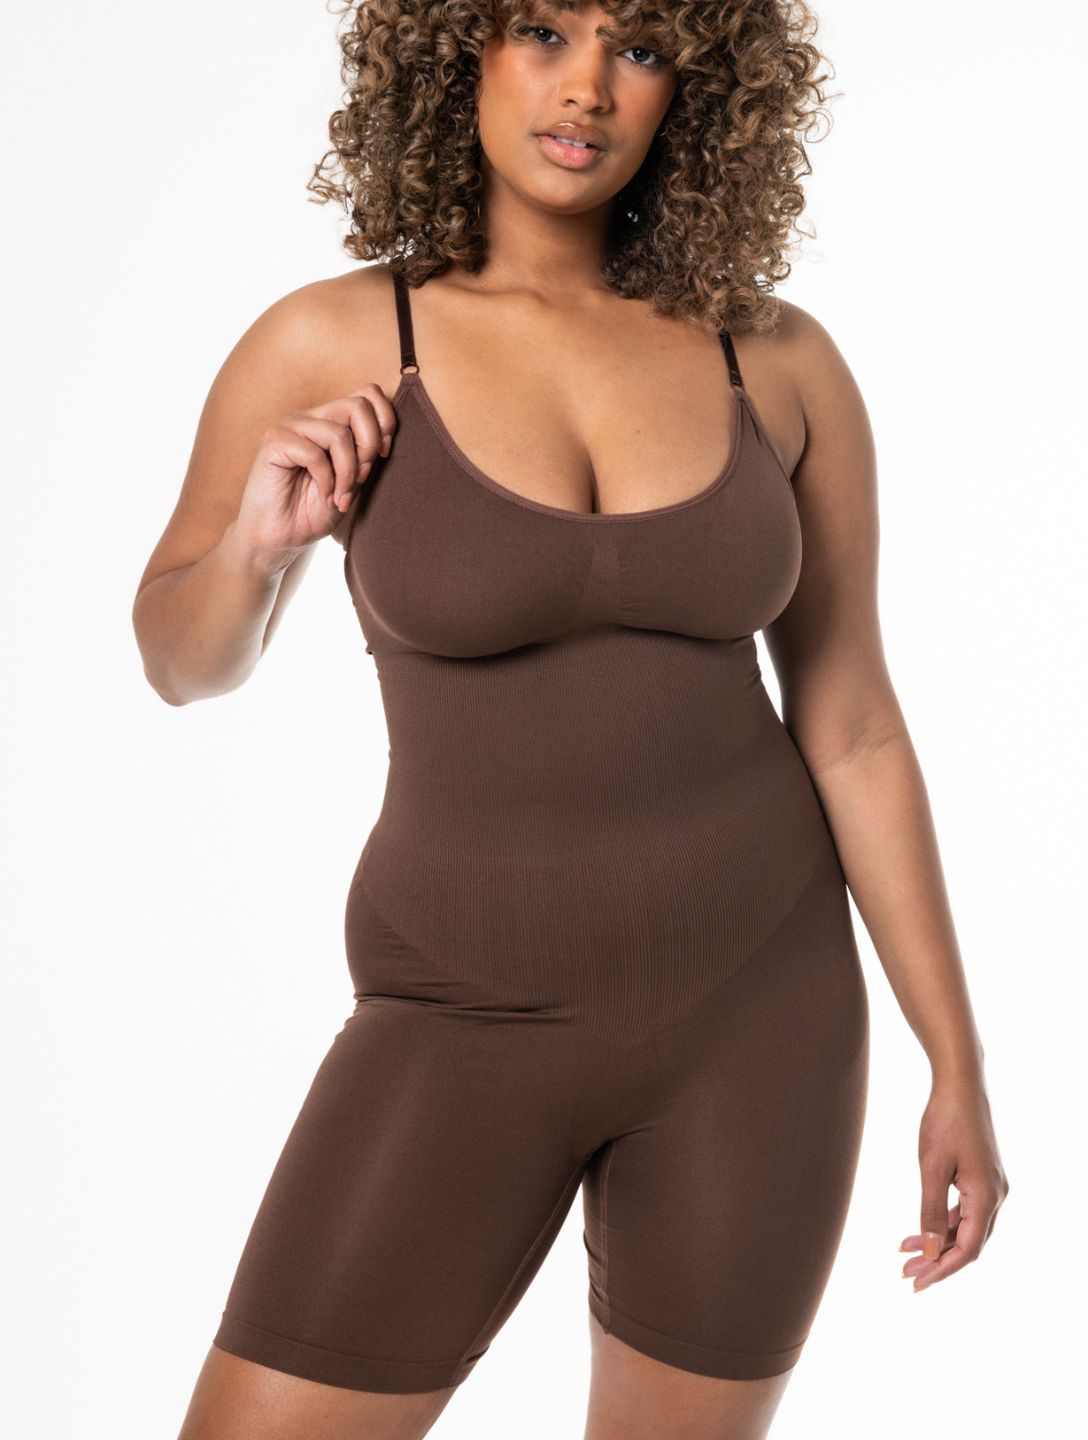 INVOGUE SHOP Snatched Bodysuit for Women | Shapewear Seamless Sculpting  Body Shaper| Bodysuit Bodyshaper | Slay with Confidence